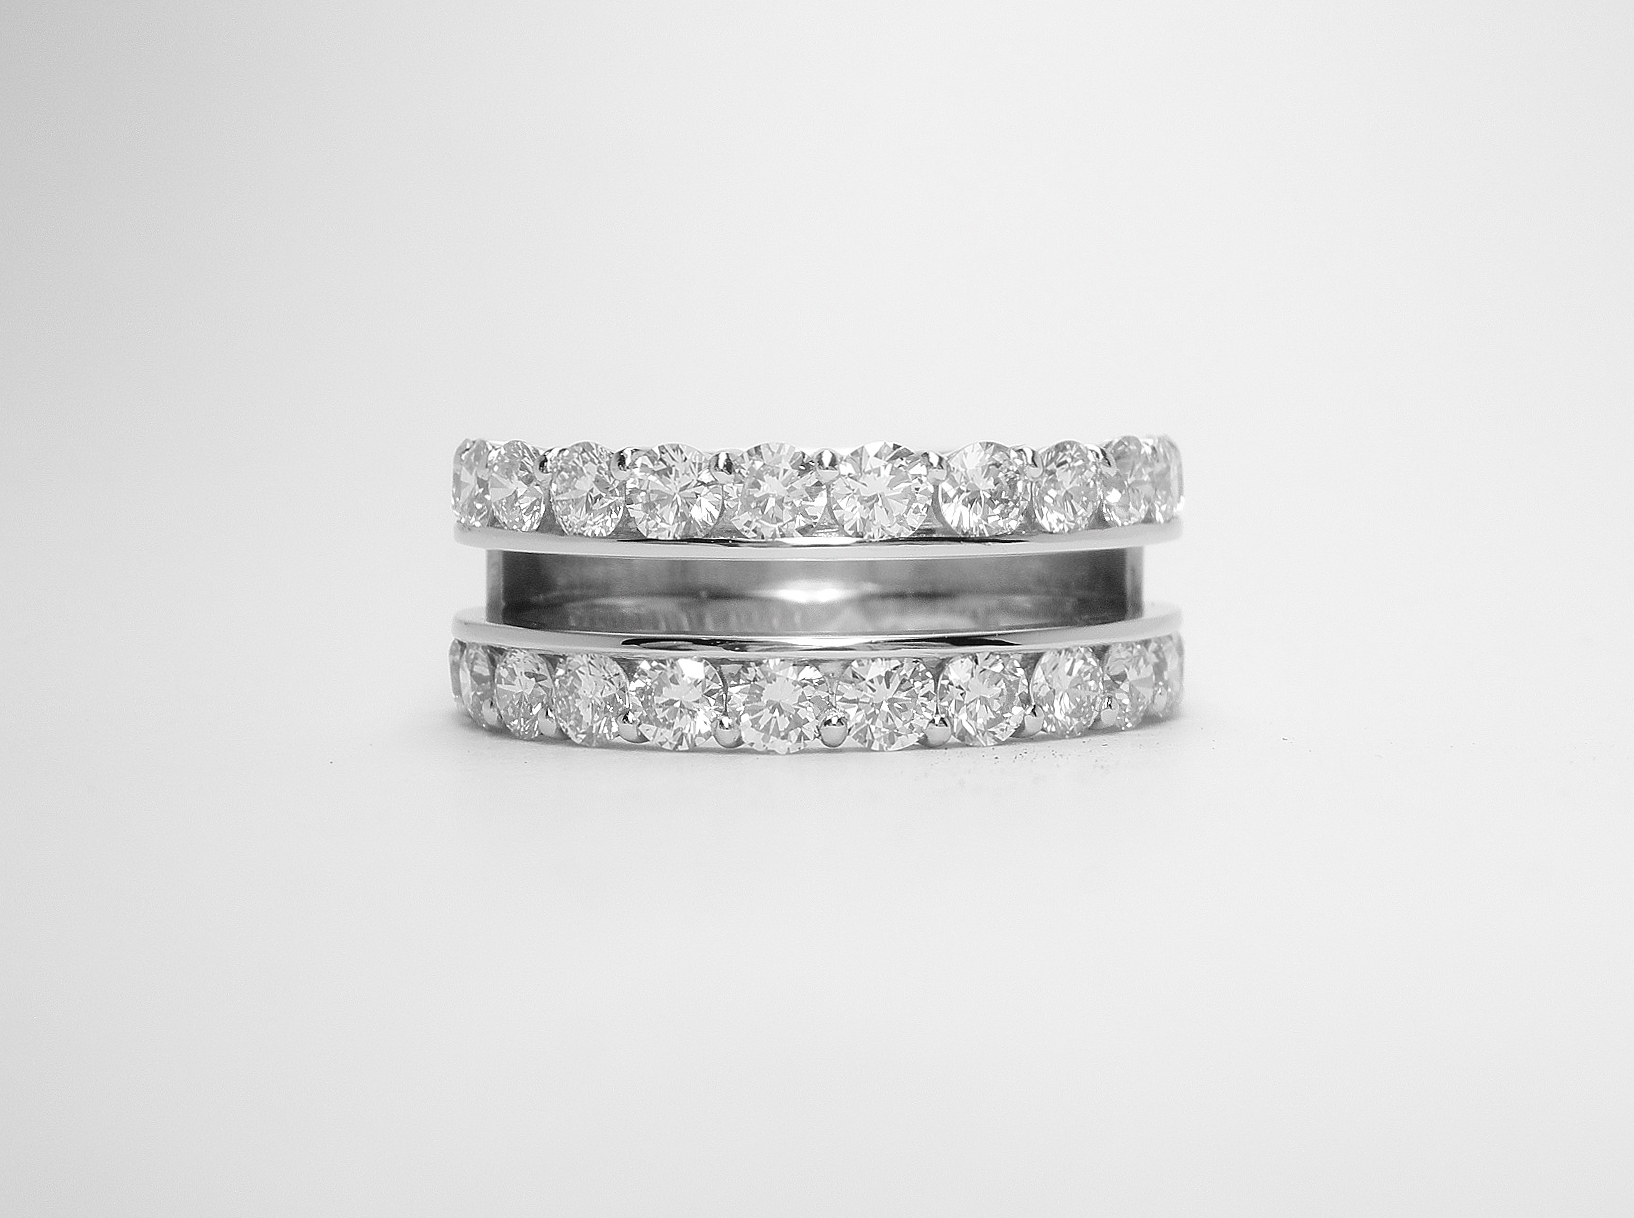 The double part channel set wedding ring showing the slot to accept the wedding ring and the plate at the back to which both are attached.